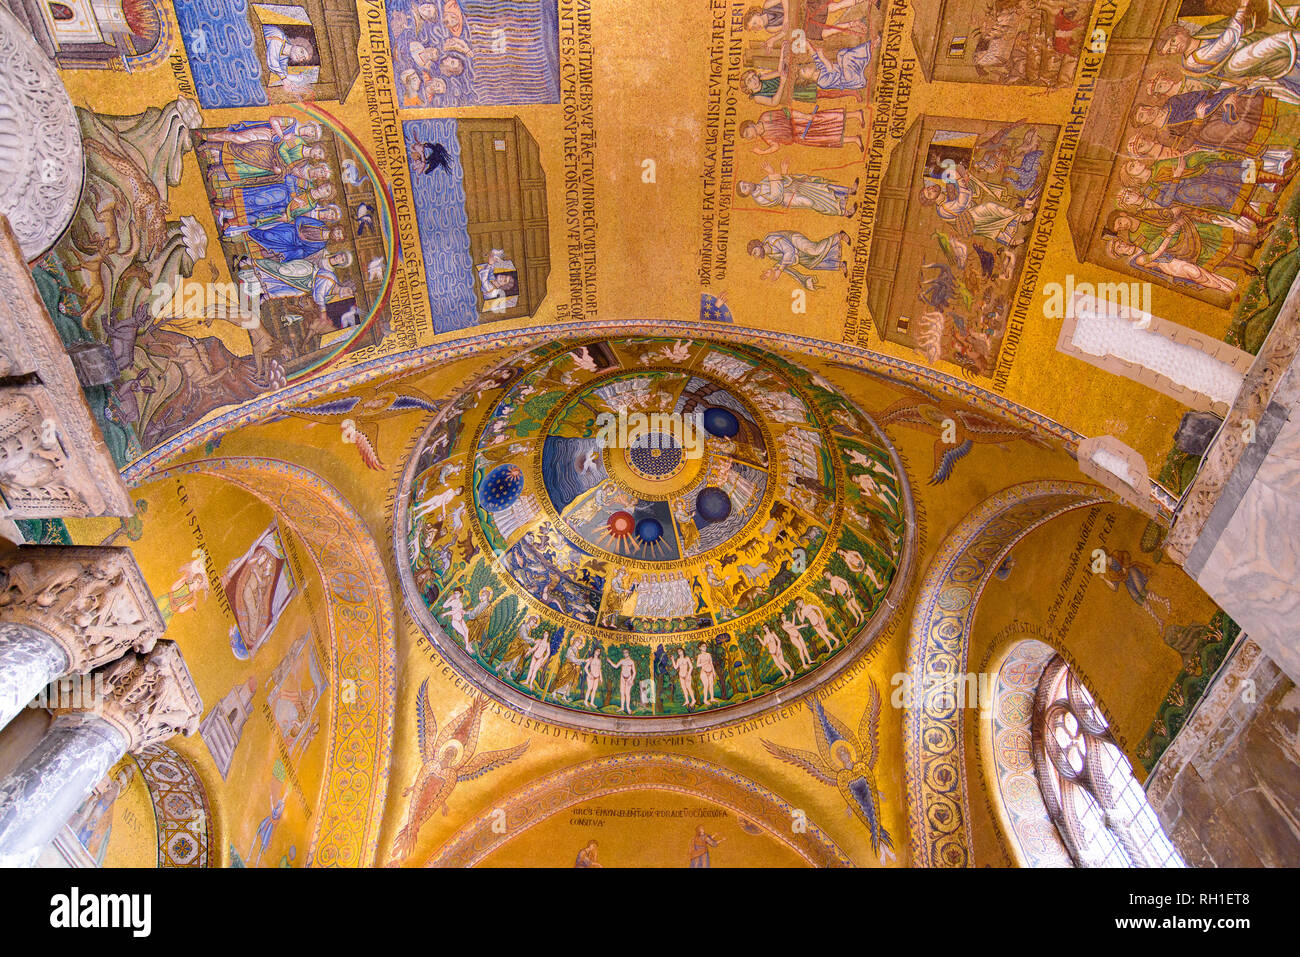 The mosaic decoration art of the interior of St Mark's Basilica, the cathedral church of Venice, Italy Stock Photo